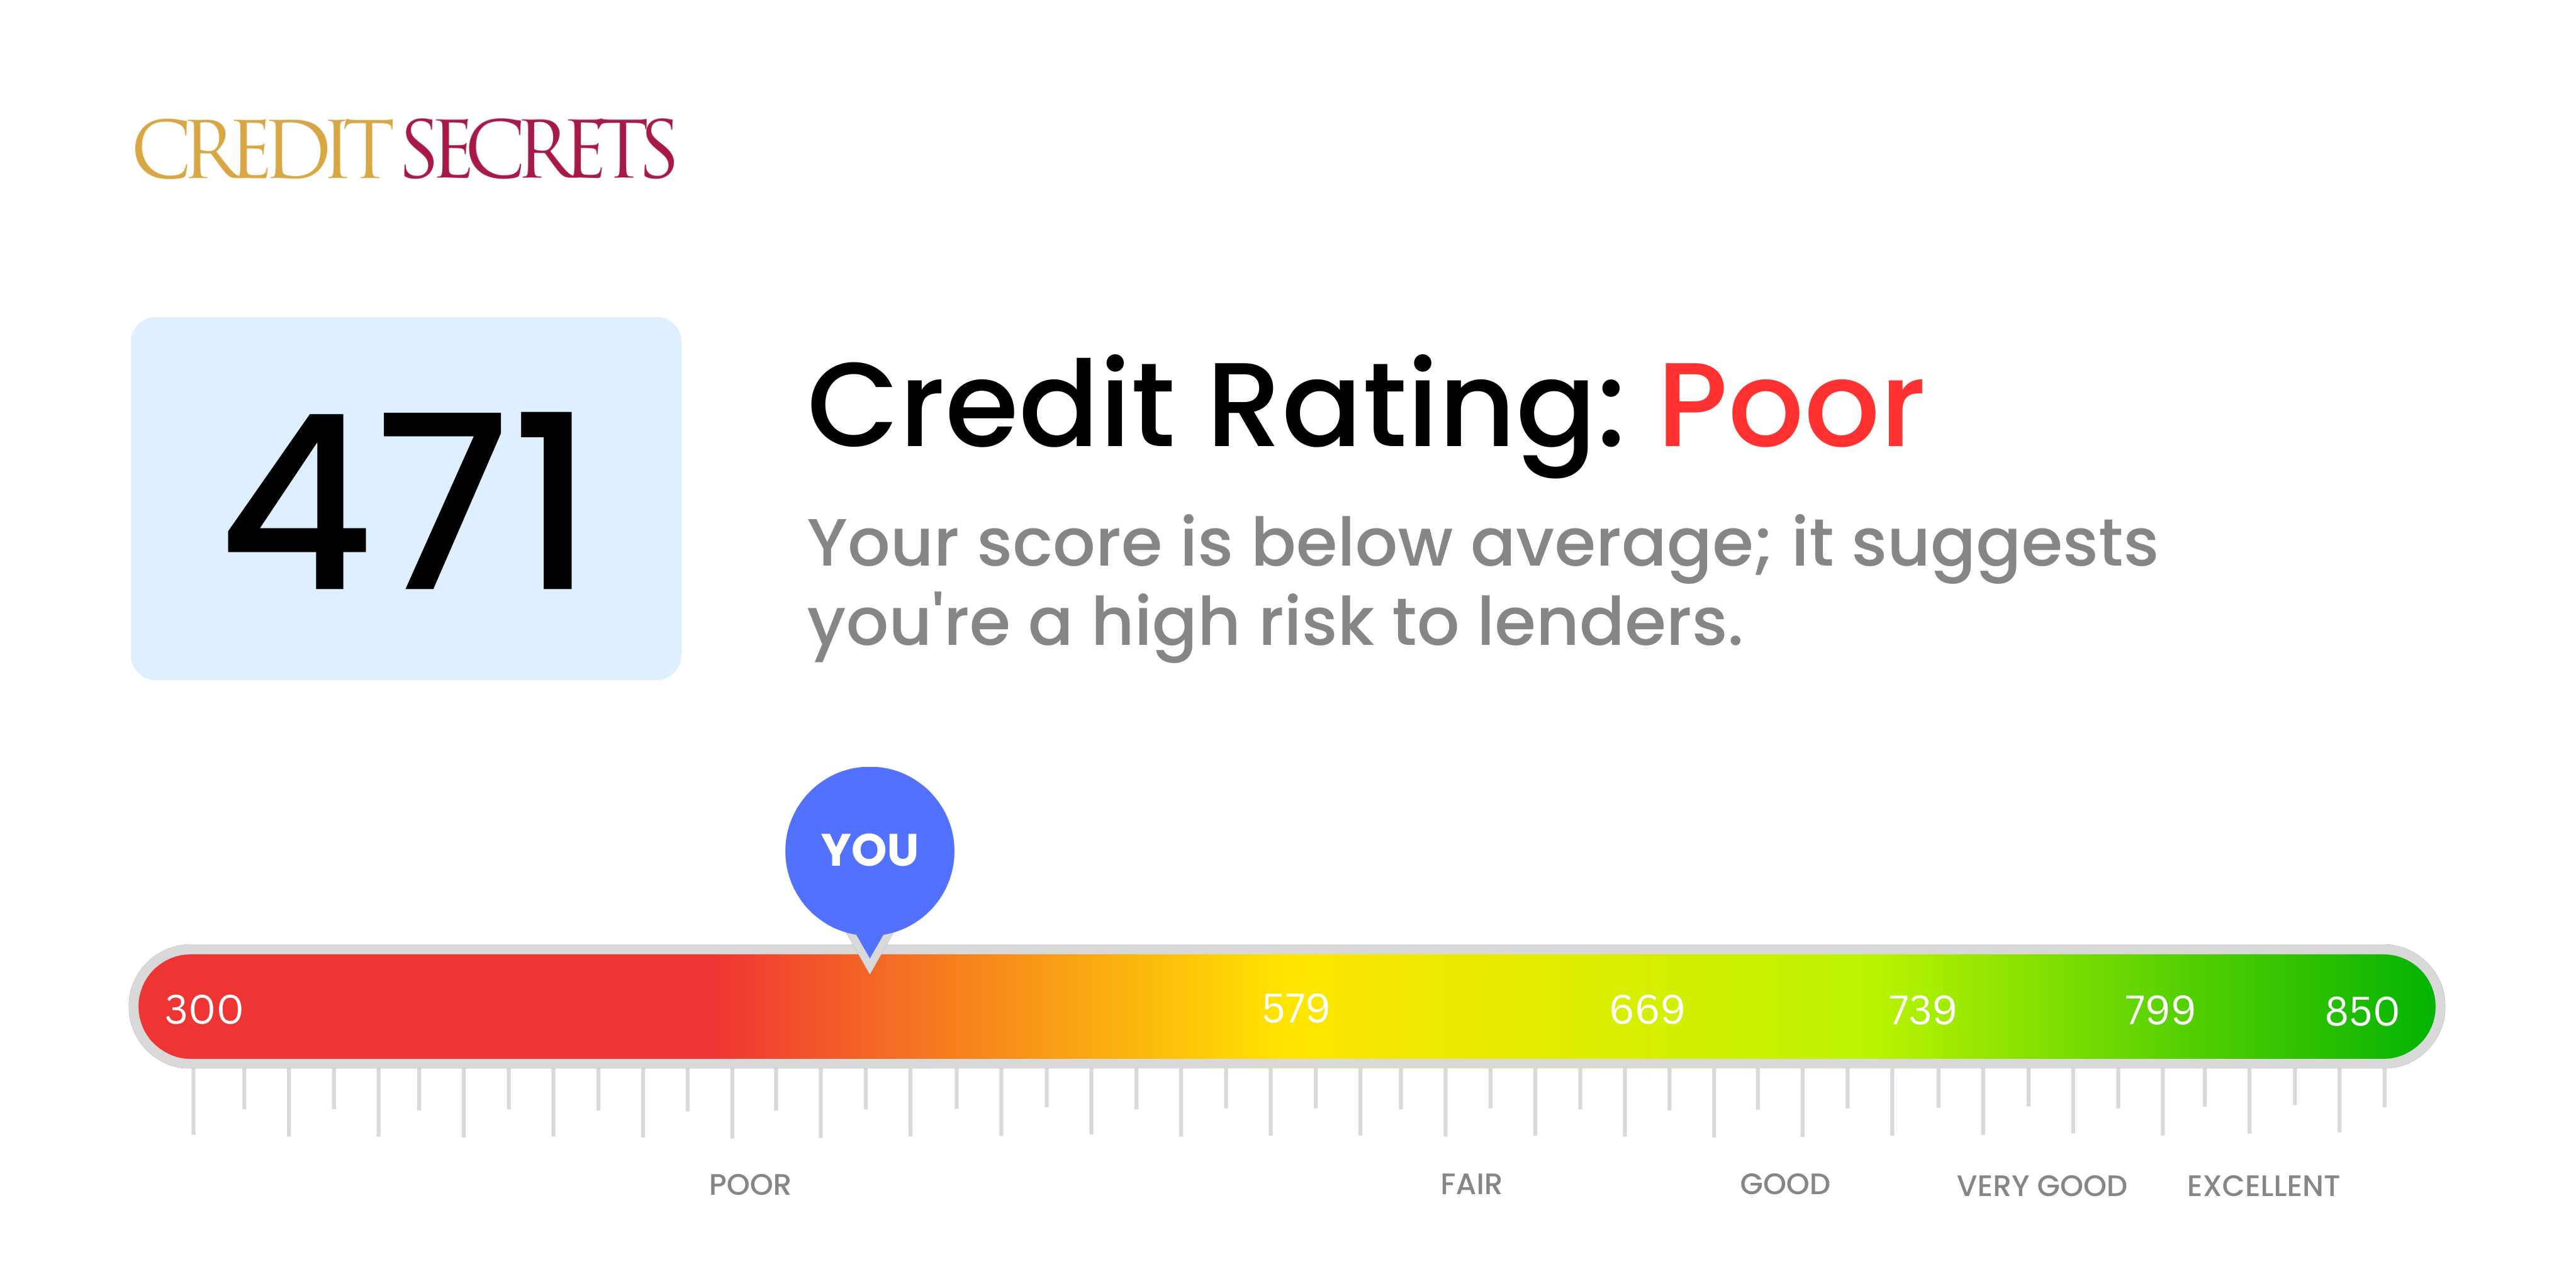 Is 471 a good credit score?